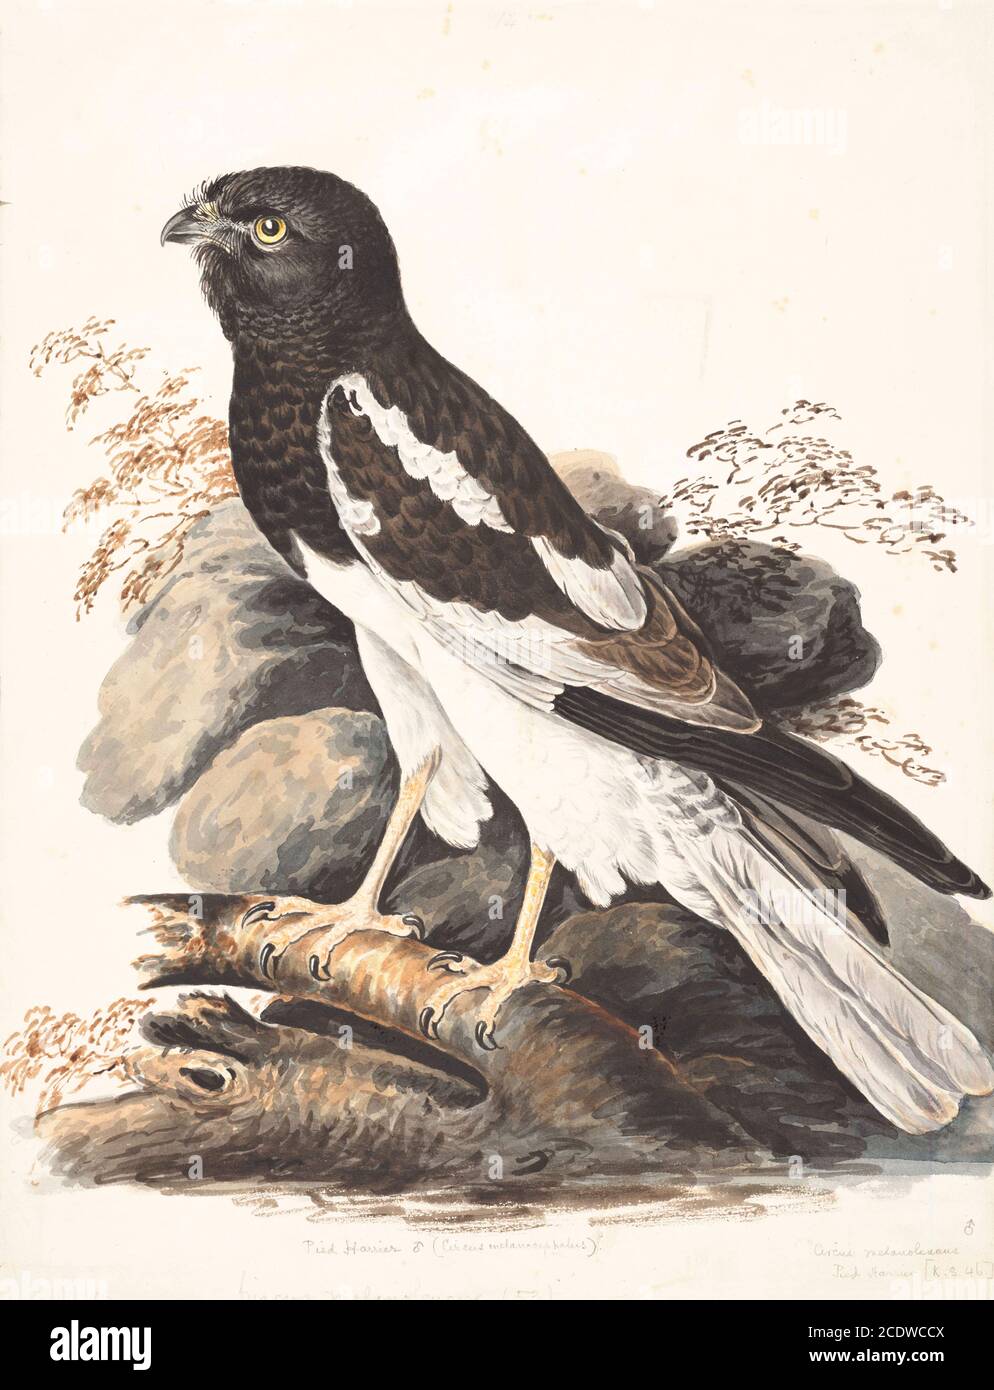 The pied harrier (Circus melanoleucos) is an Asian species of bird of prey in the family Accipitridae. It is migratory, breeding from the Amur valley in eastern Russia and north-eastern China to North Korea. Wintering individuals can be found in a wide area from Pakistan to Philippines. The population consists of approximately 10,000 individuals and the number is thought to be in moderate decline.This medium-sized harrier (length 45 cm/18in, wing span 115 cm/46in) nests in steppes and associated wetlands. Wintering individuals are often seen hunting above rice paddies and marshes. 18th century Stock Photo